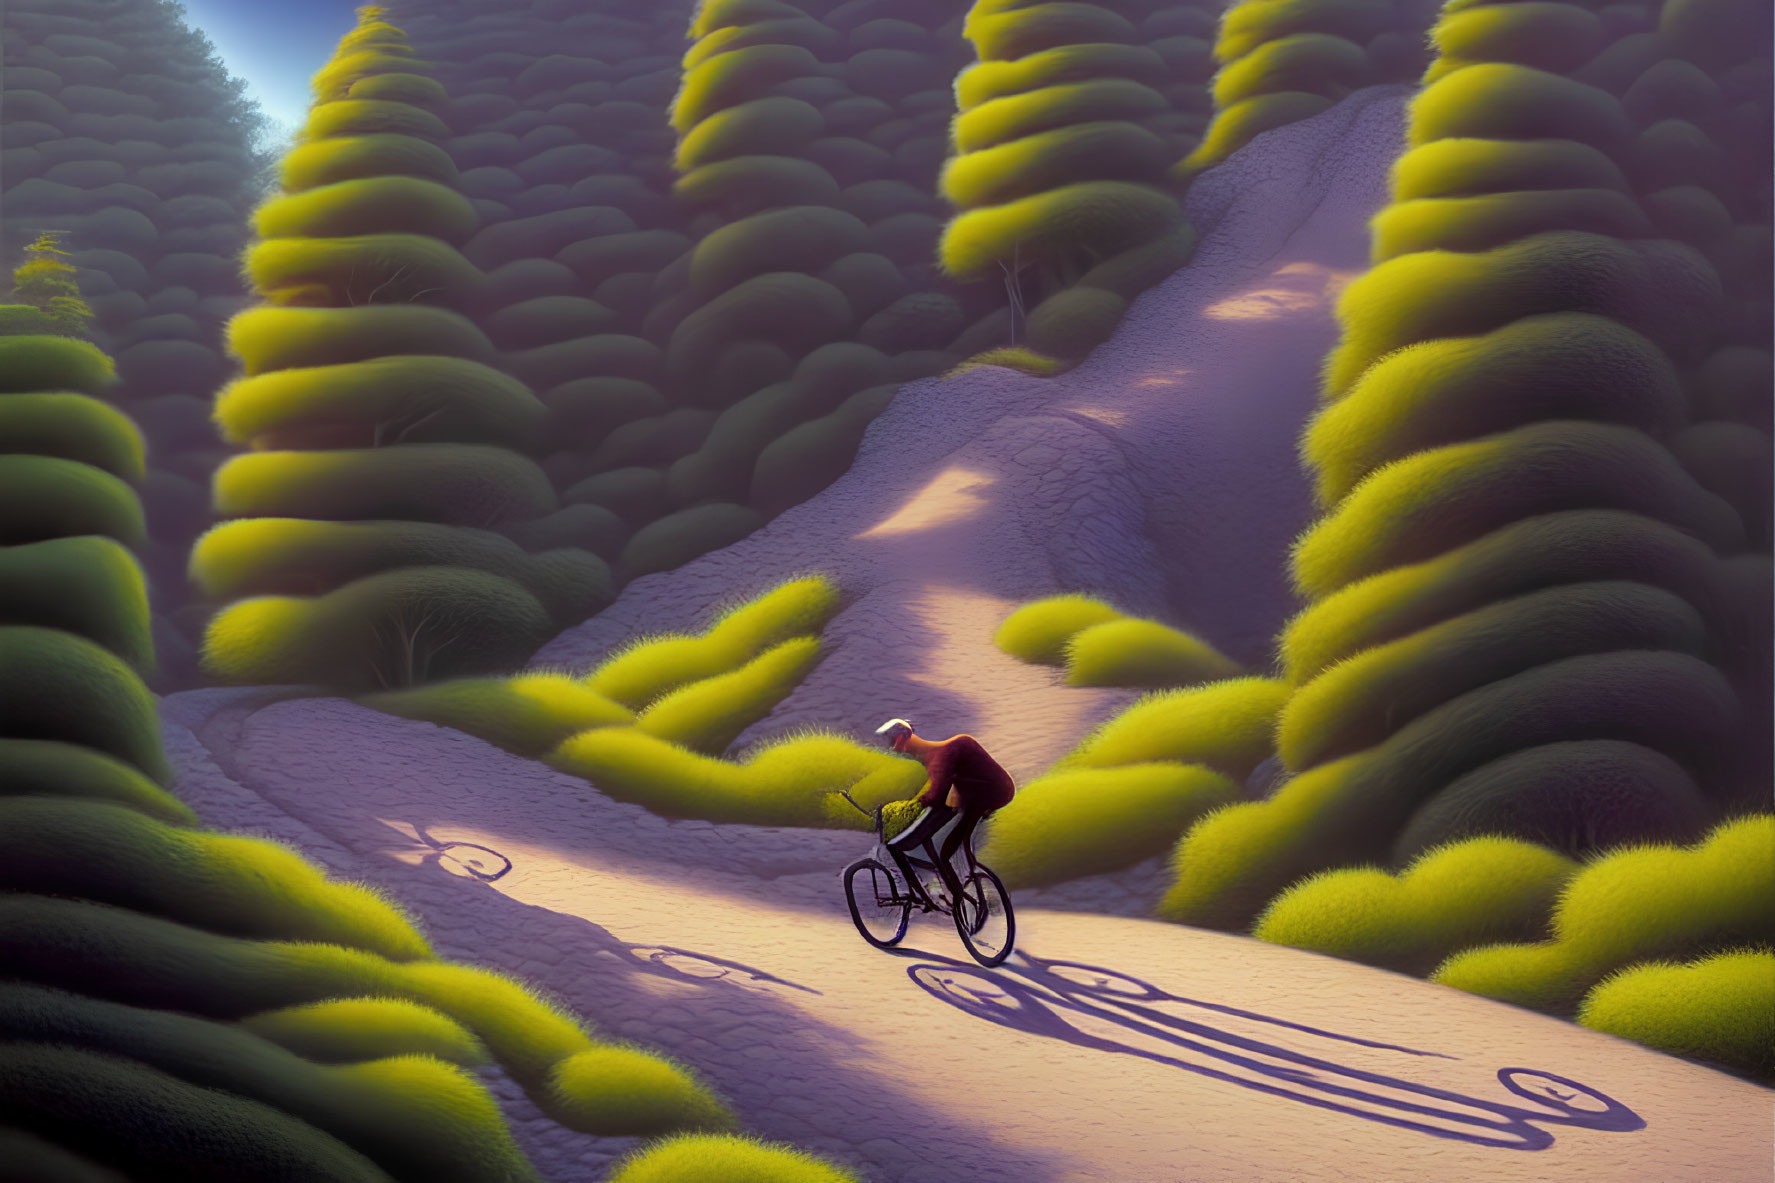 Cyclist riding through lush forest with stylized conical trees and long shadows